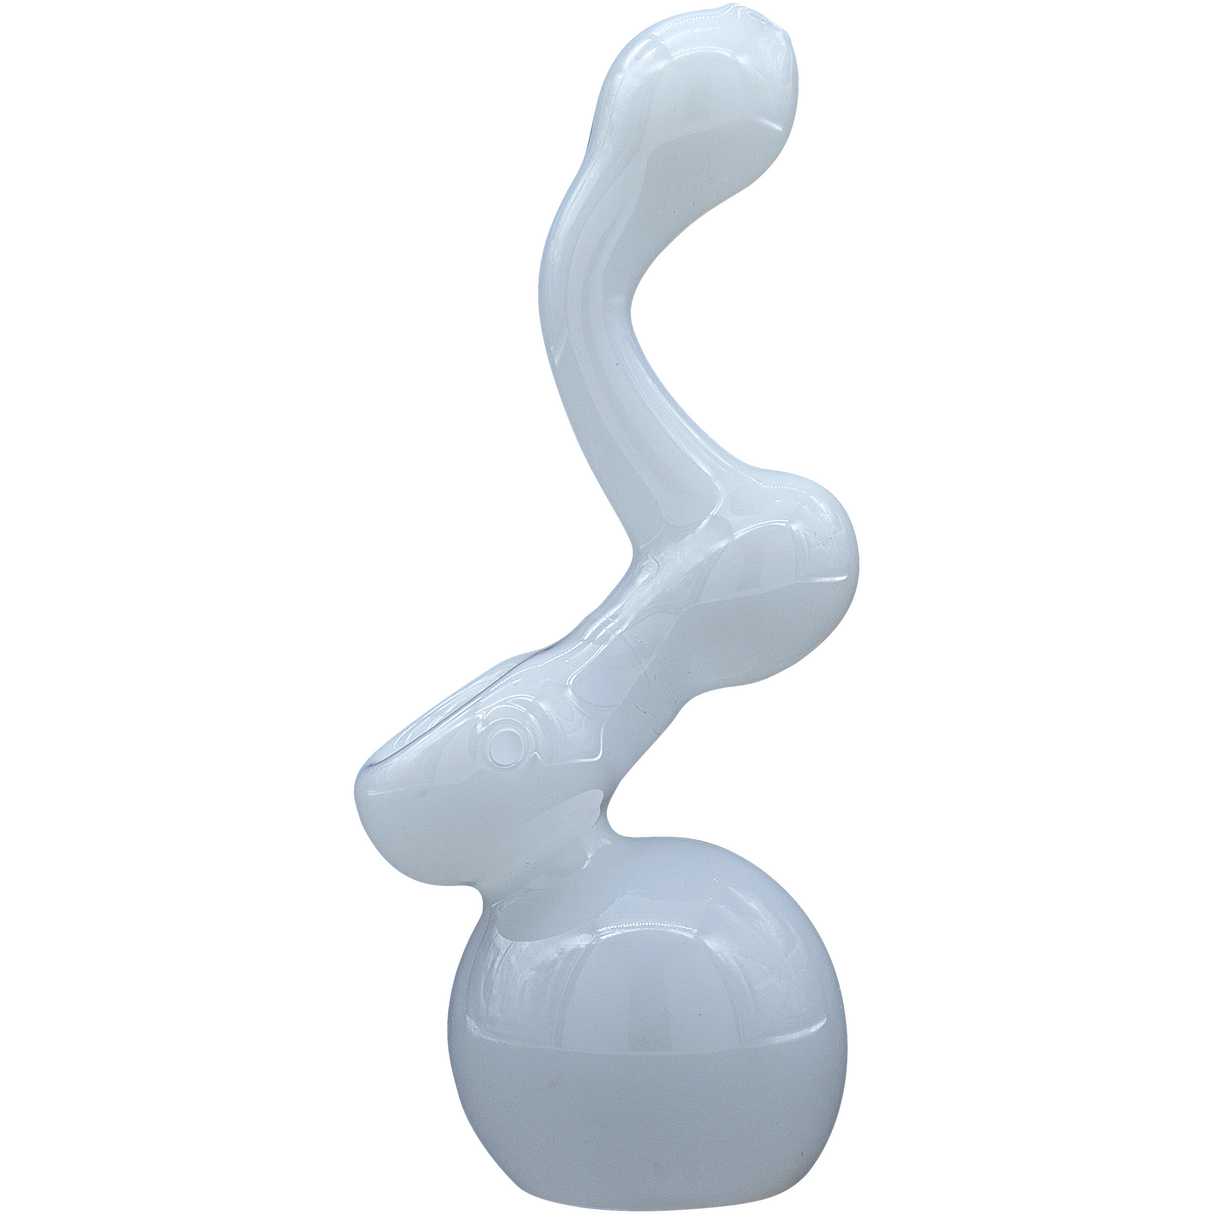 LA Pipes "Ivory Sherlock" Glass Bubbler Pipe with Bubble Design for Dry Herbs, Front View